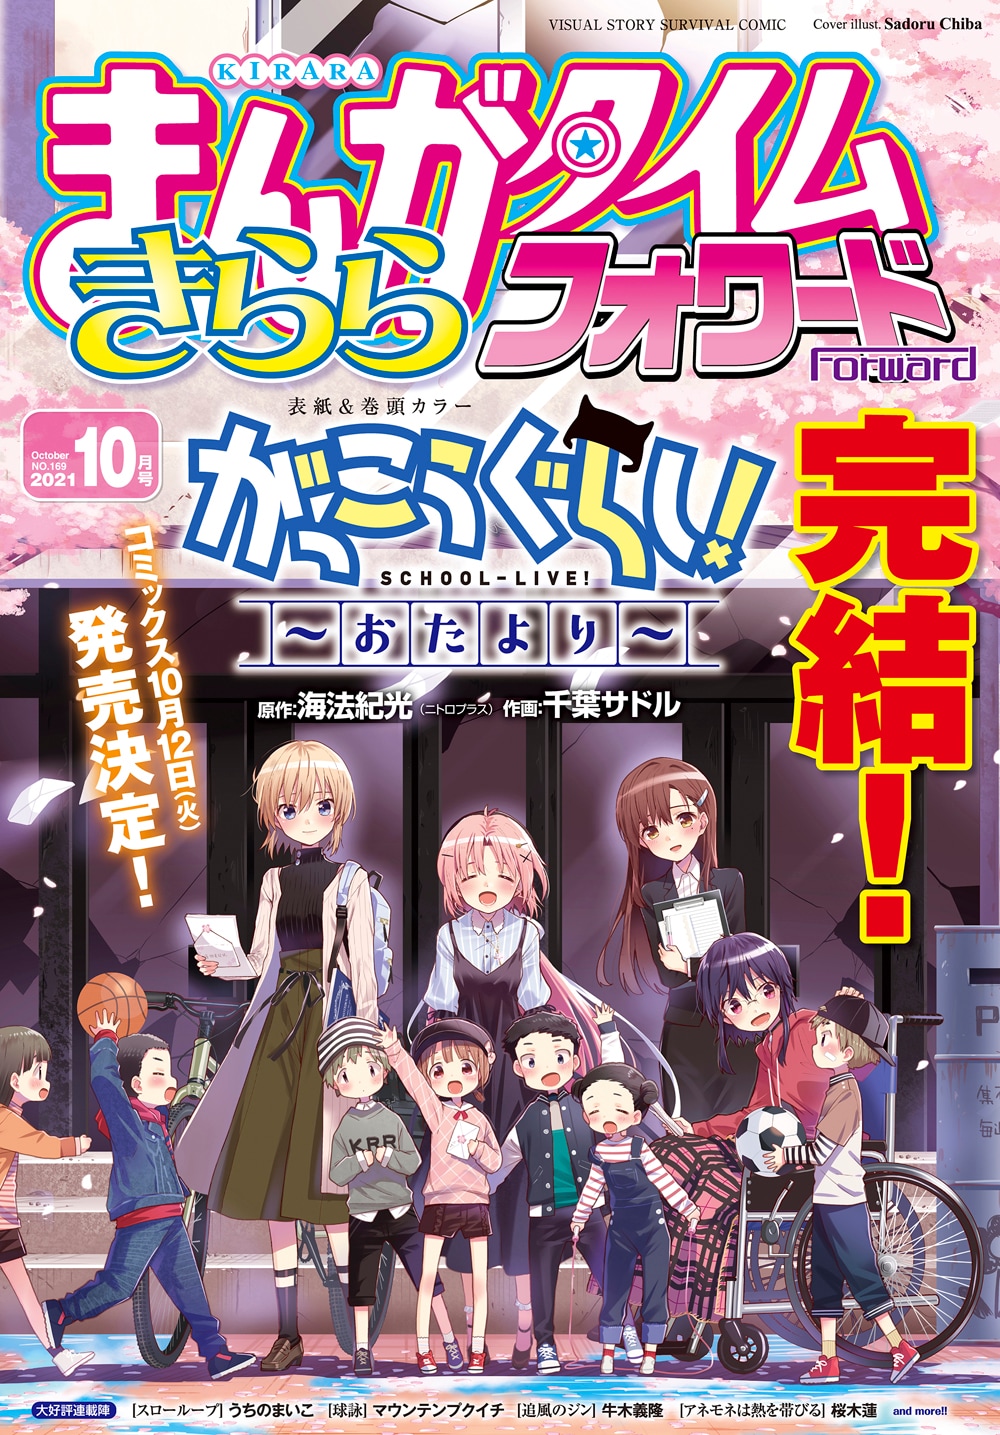 "School-Live!" Completed "Otayori" depicting the final episode, the book will be released in October